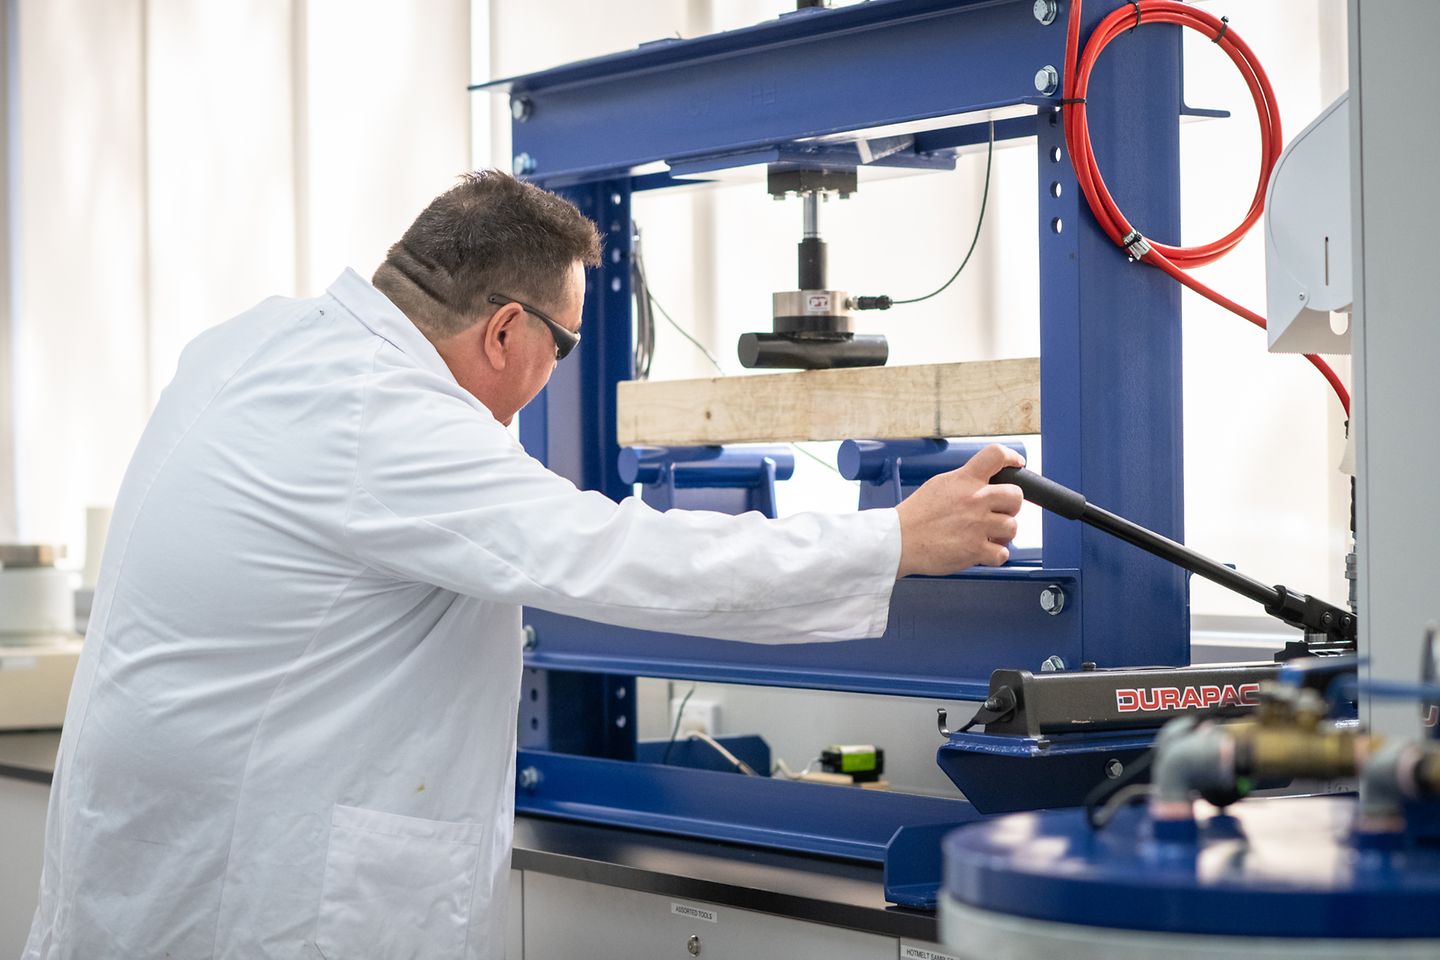 The upgraded lab is equipped with state-of-the-art technologies, allowing Henkel to test and tailor products to the requirements of customers in key growth sectors in Australia and New Zealand, namely food and beverage, packaging, engineered wood and general manufacturing and maintenance.